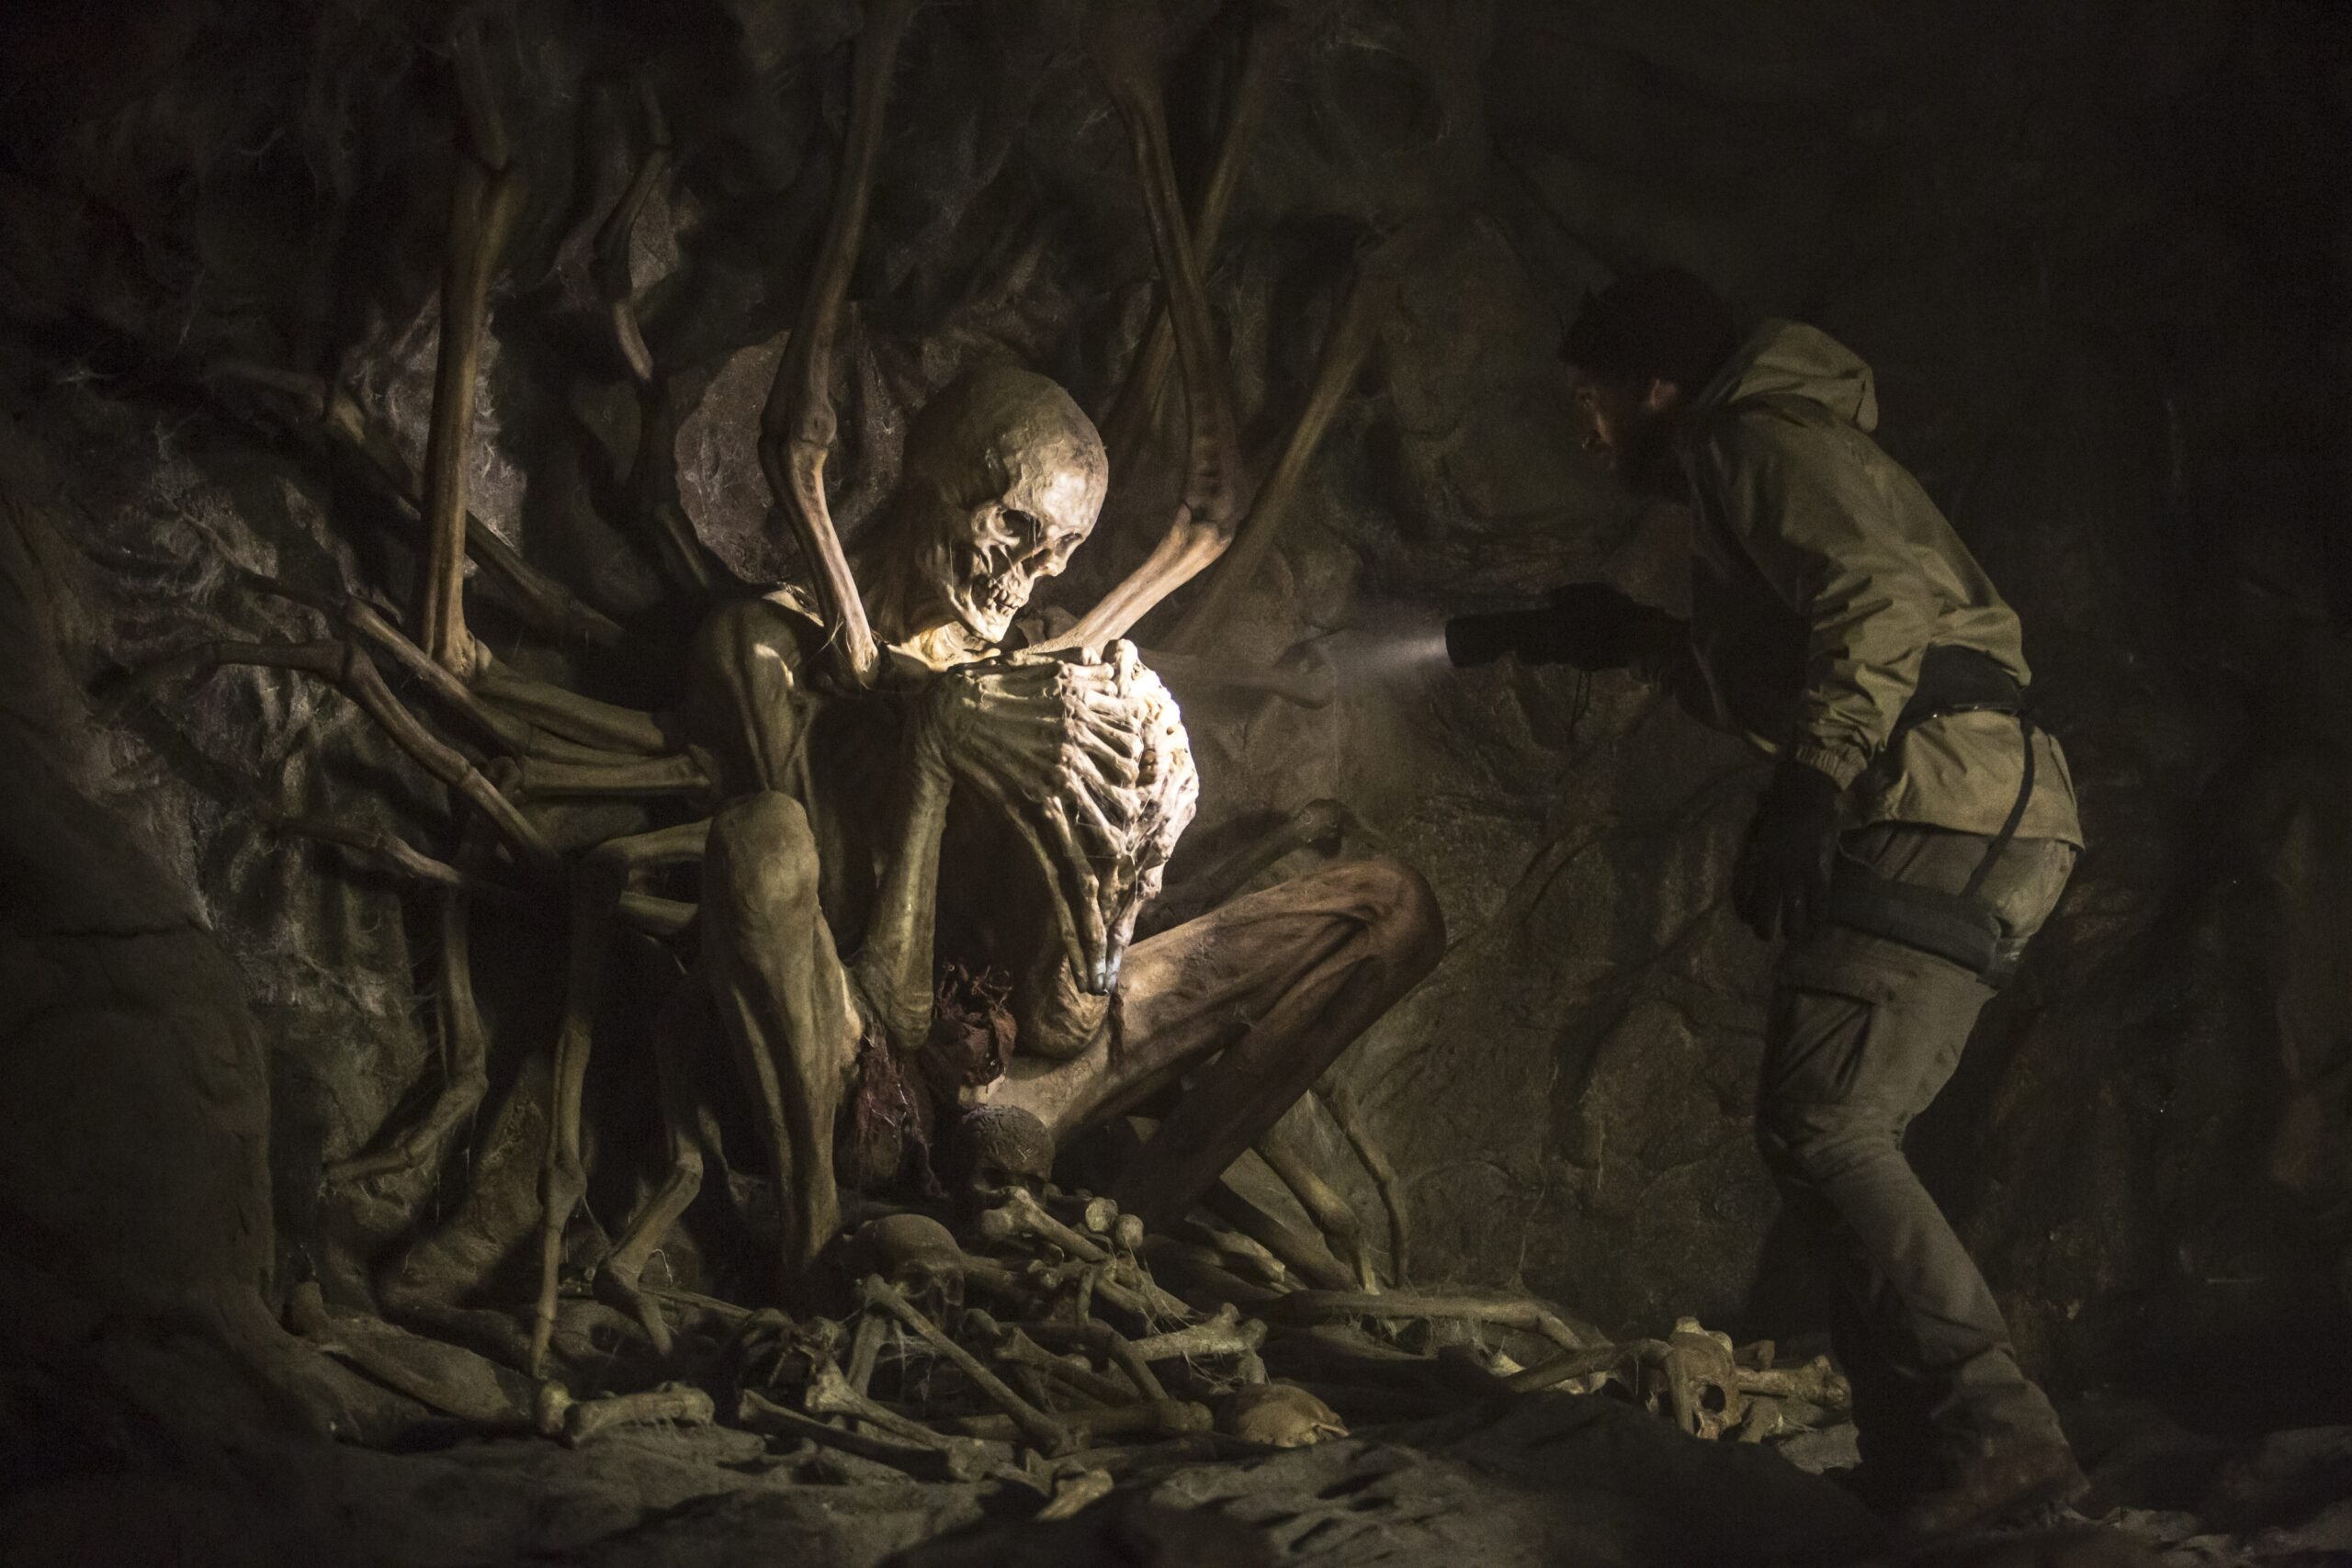 Character discovering skeleton in cave in promotional still from "The Empty Man"